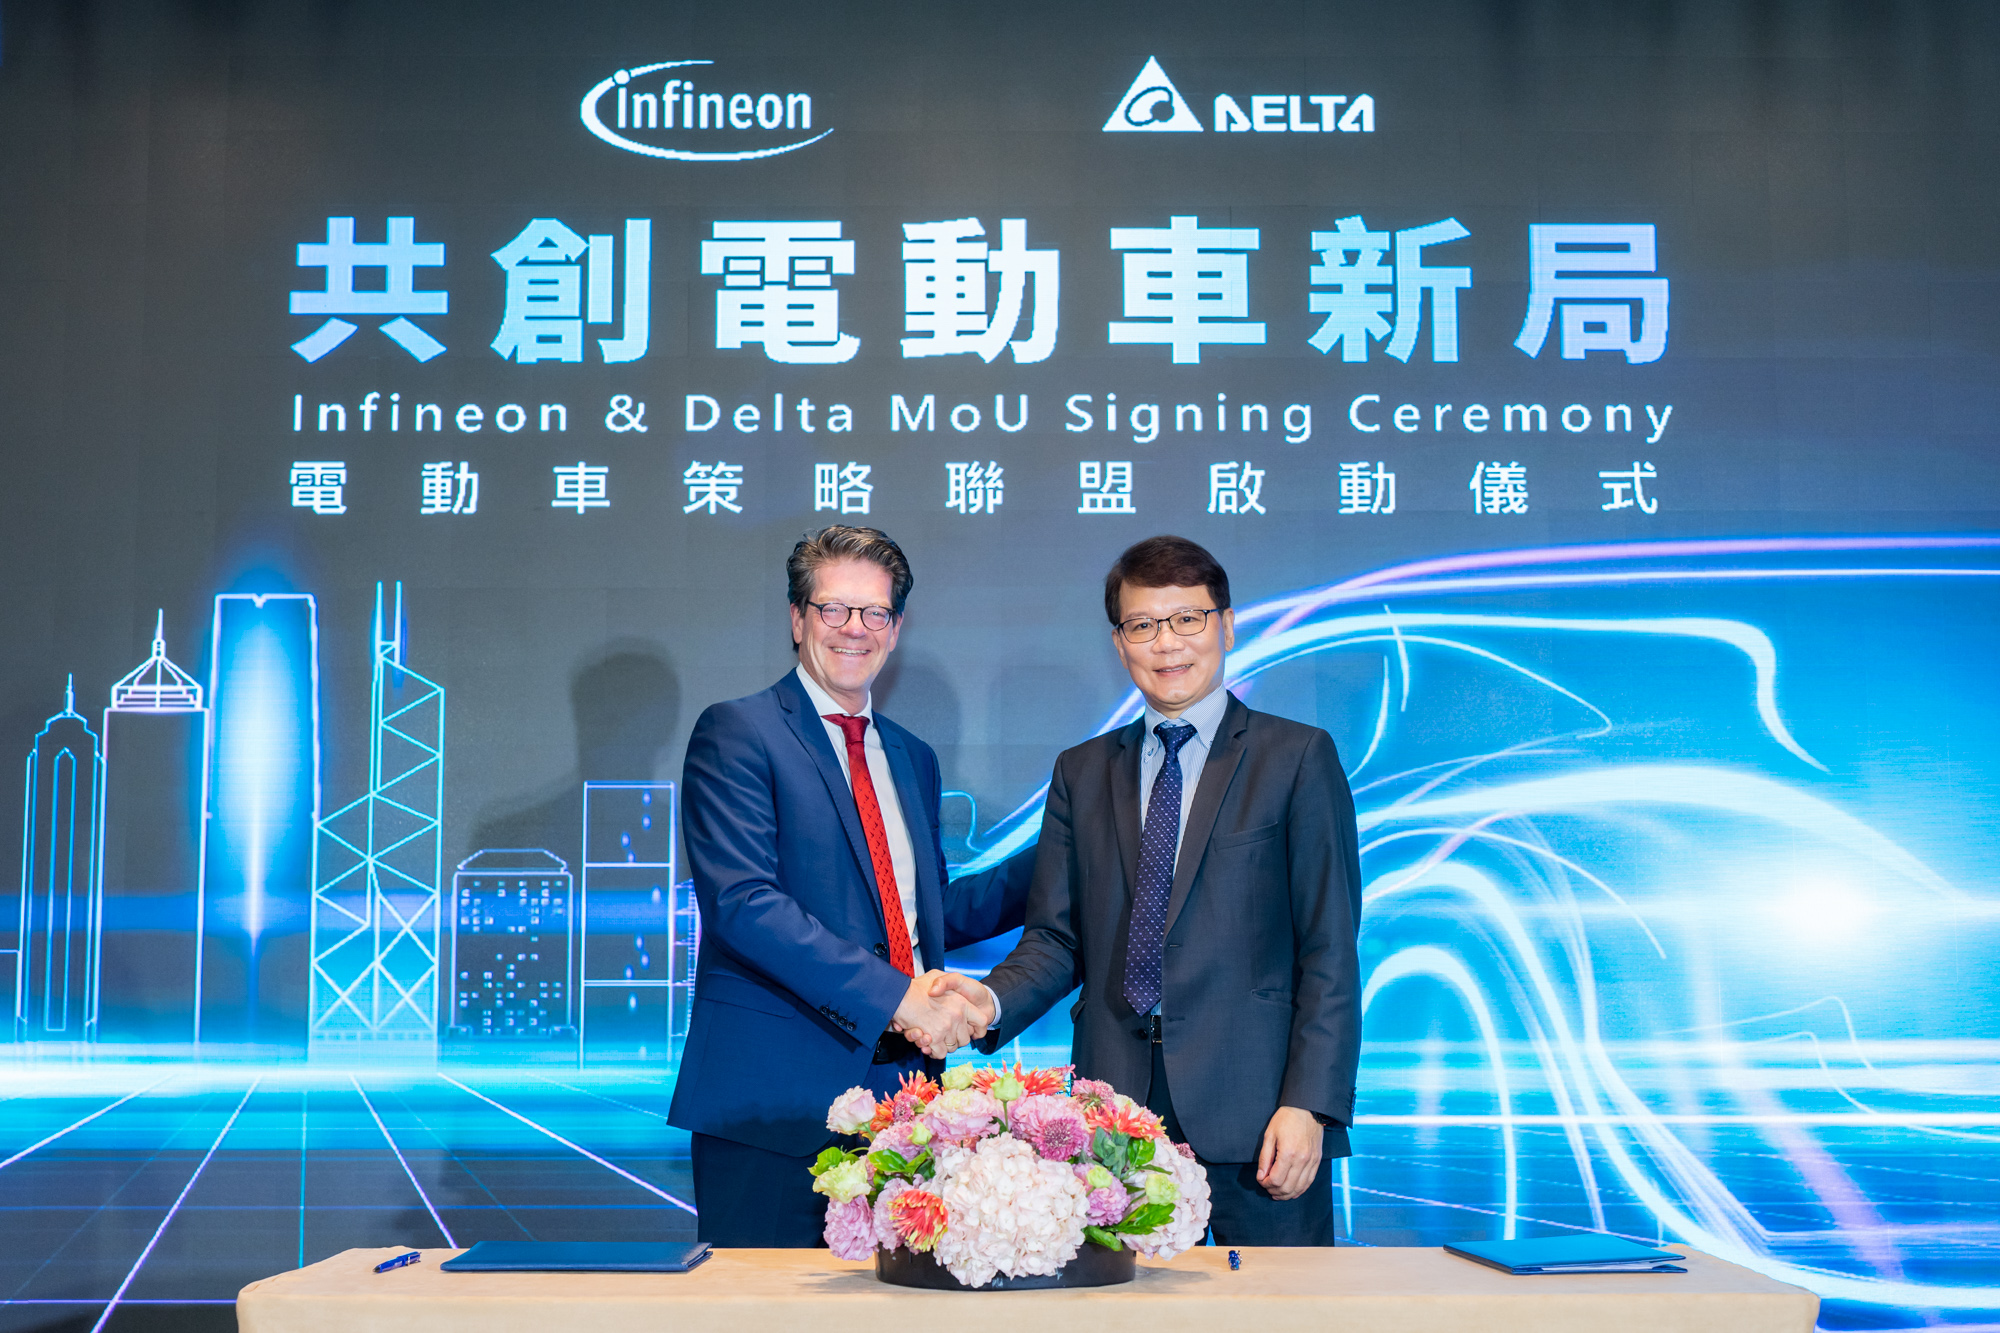 Infineon and Delta signed a Memorandum of Understanding that will deepen their joint innovation activities to provide more efficient and higher-density solutions for the fast-growing market of electric vehicles (EV).